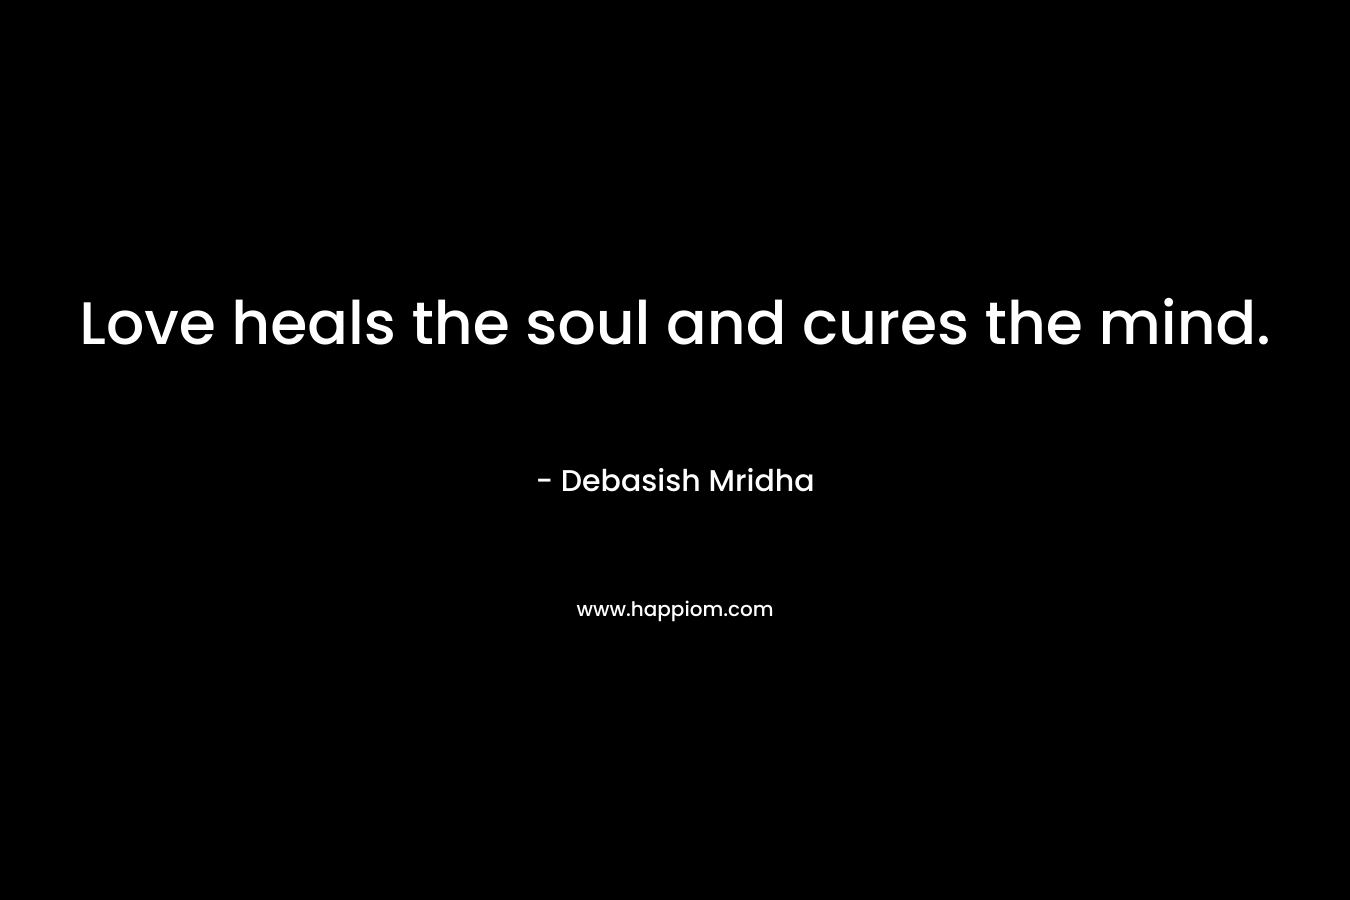 Love heals the soul and cures the mind.